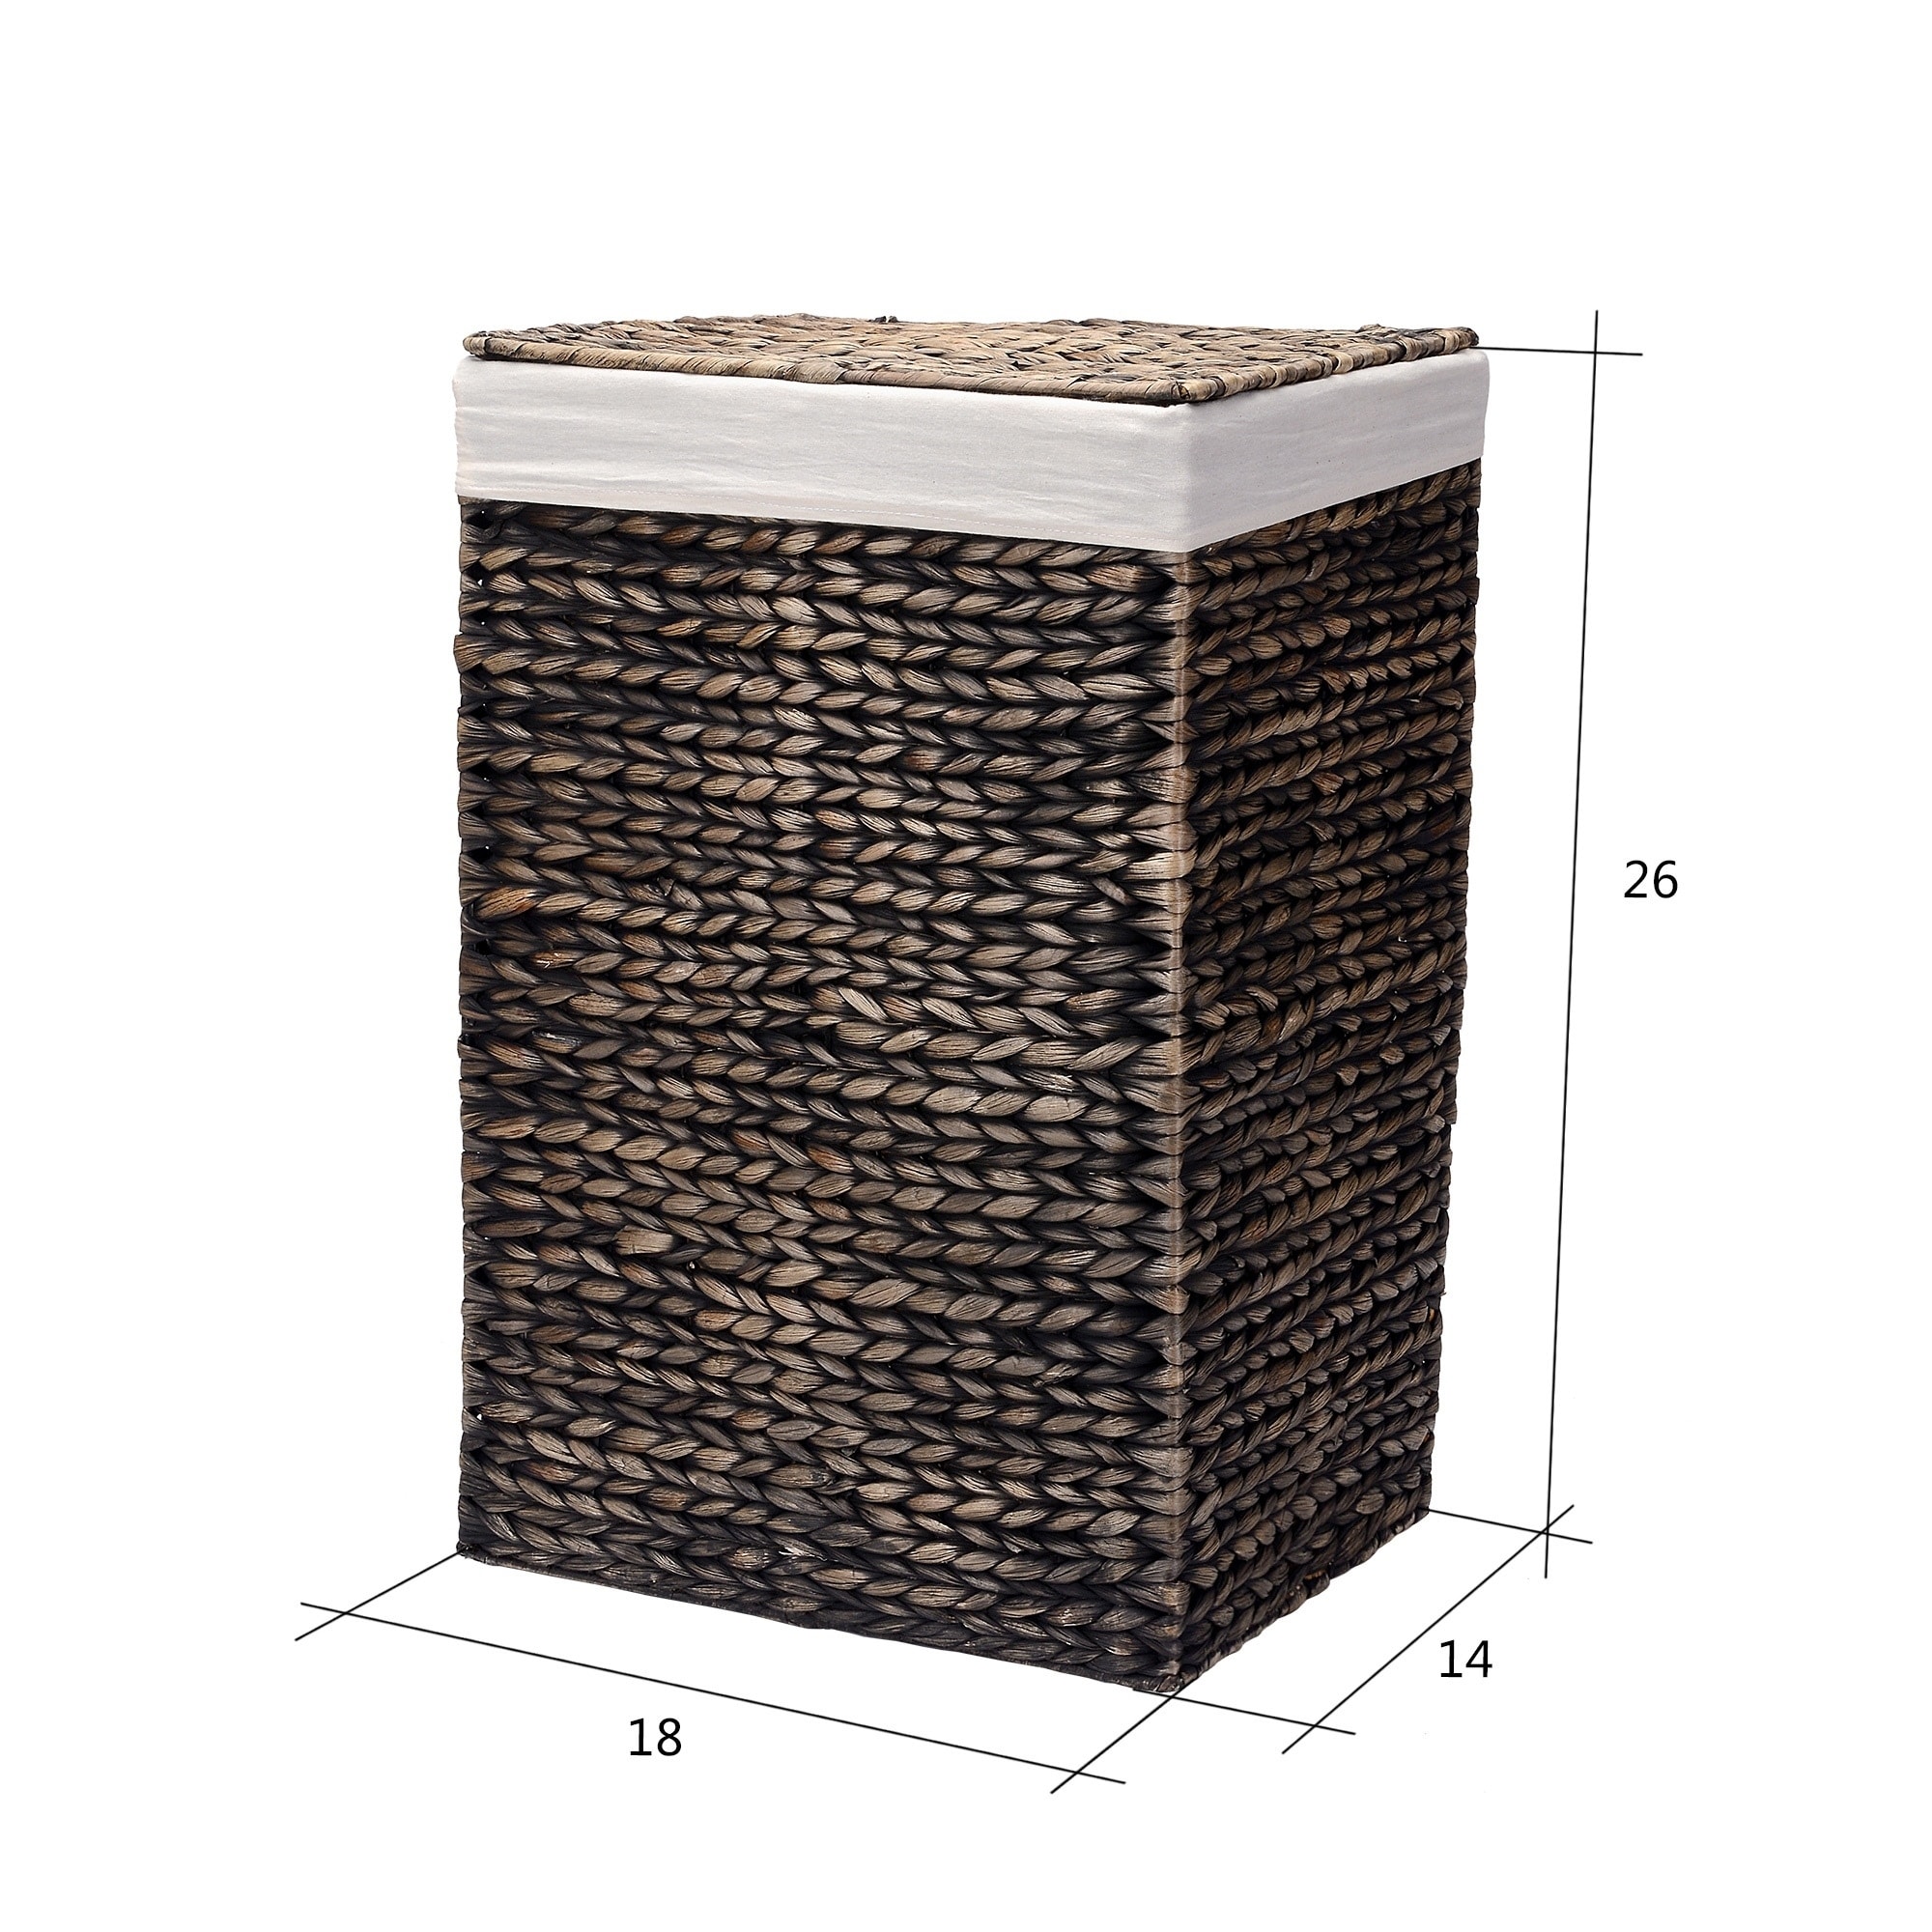 Casafield 10.5 x 10.5 Water Hyacinth Storage Baskets, Collapsible Cube  Organizers, Woven Bins for Bathroom, Bedroom, Laundry, Pantry, Shelves